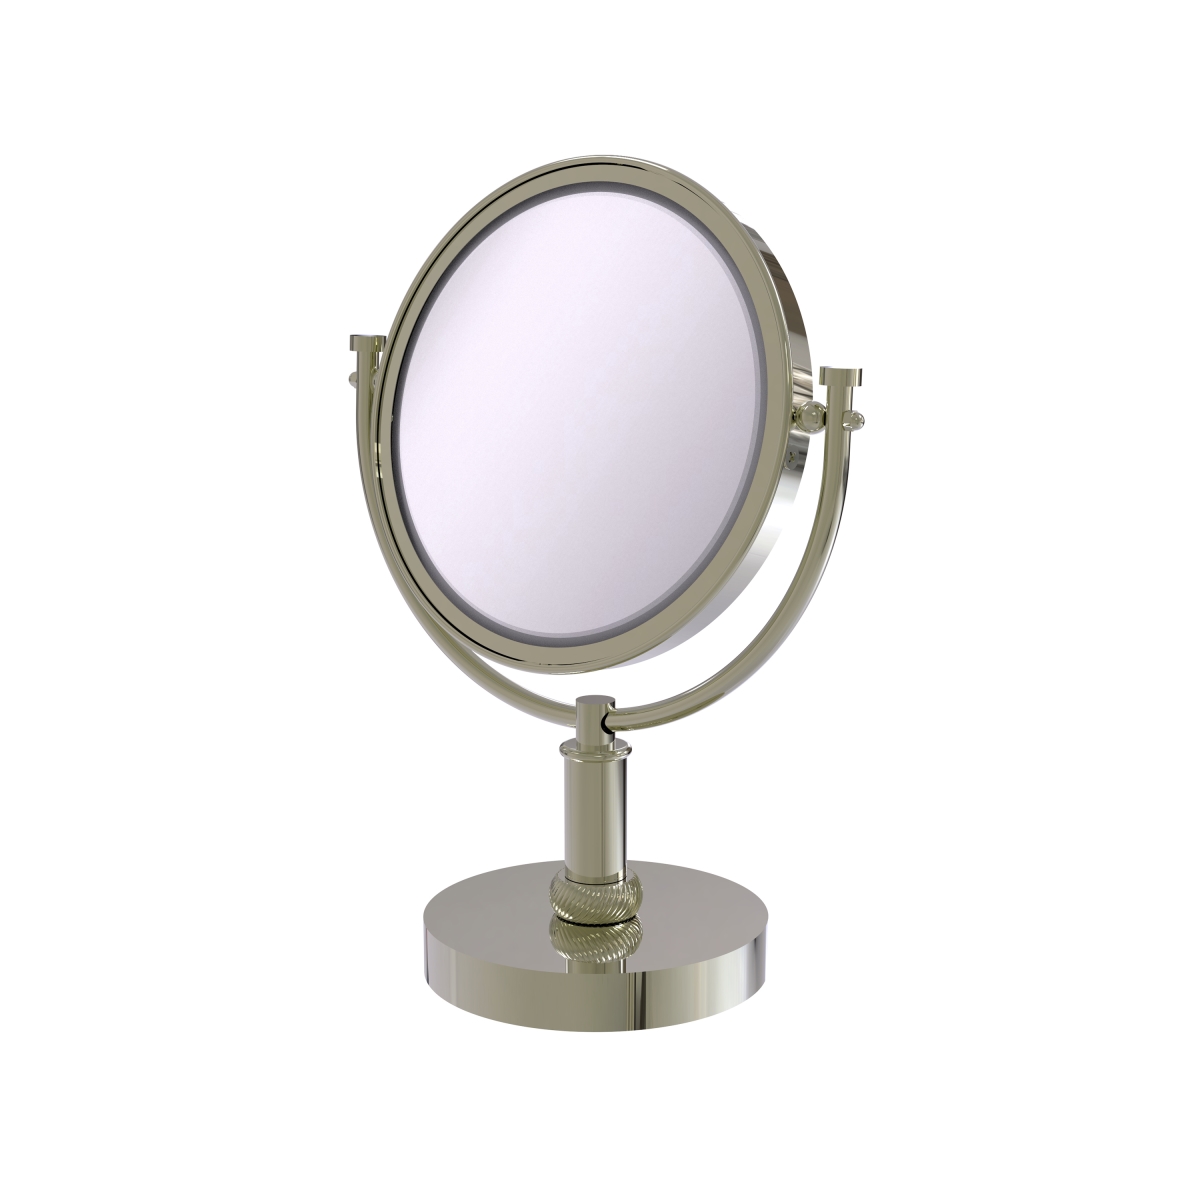 DM-4T-2X-PNI 8 in. Vanity Top Make-Up Mirror 2X Magnification, Polished Nickel - 15 x 8 x 8 in -  Allied Brass, DM-4T/2X-PNI